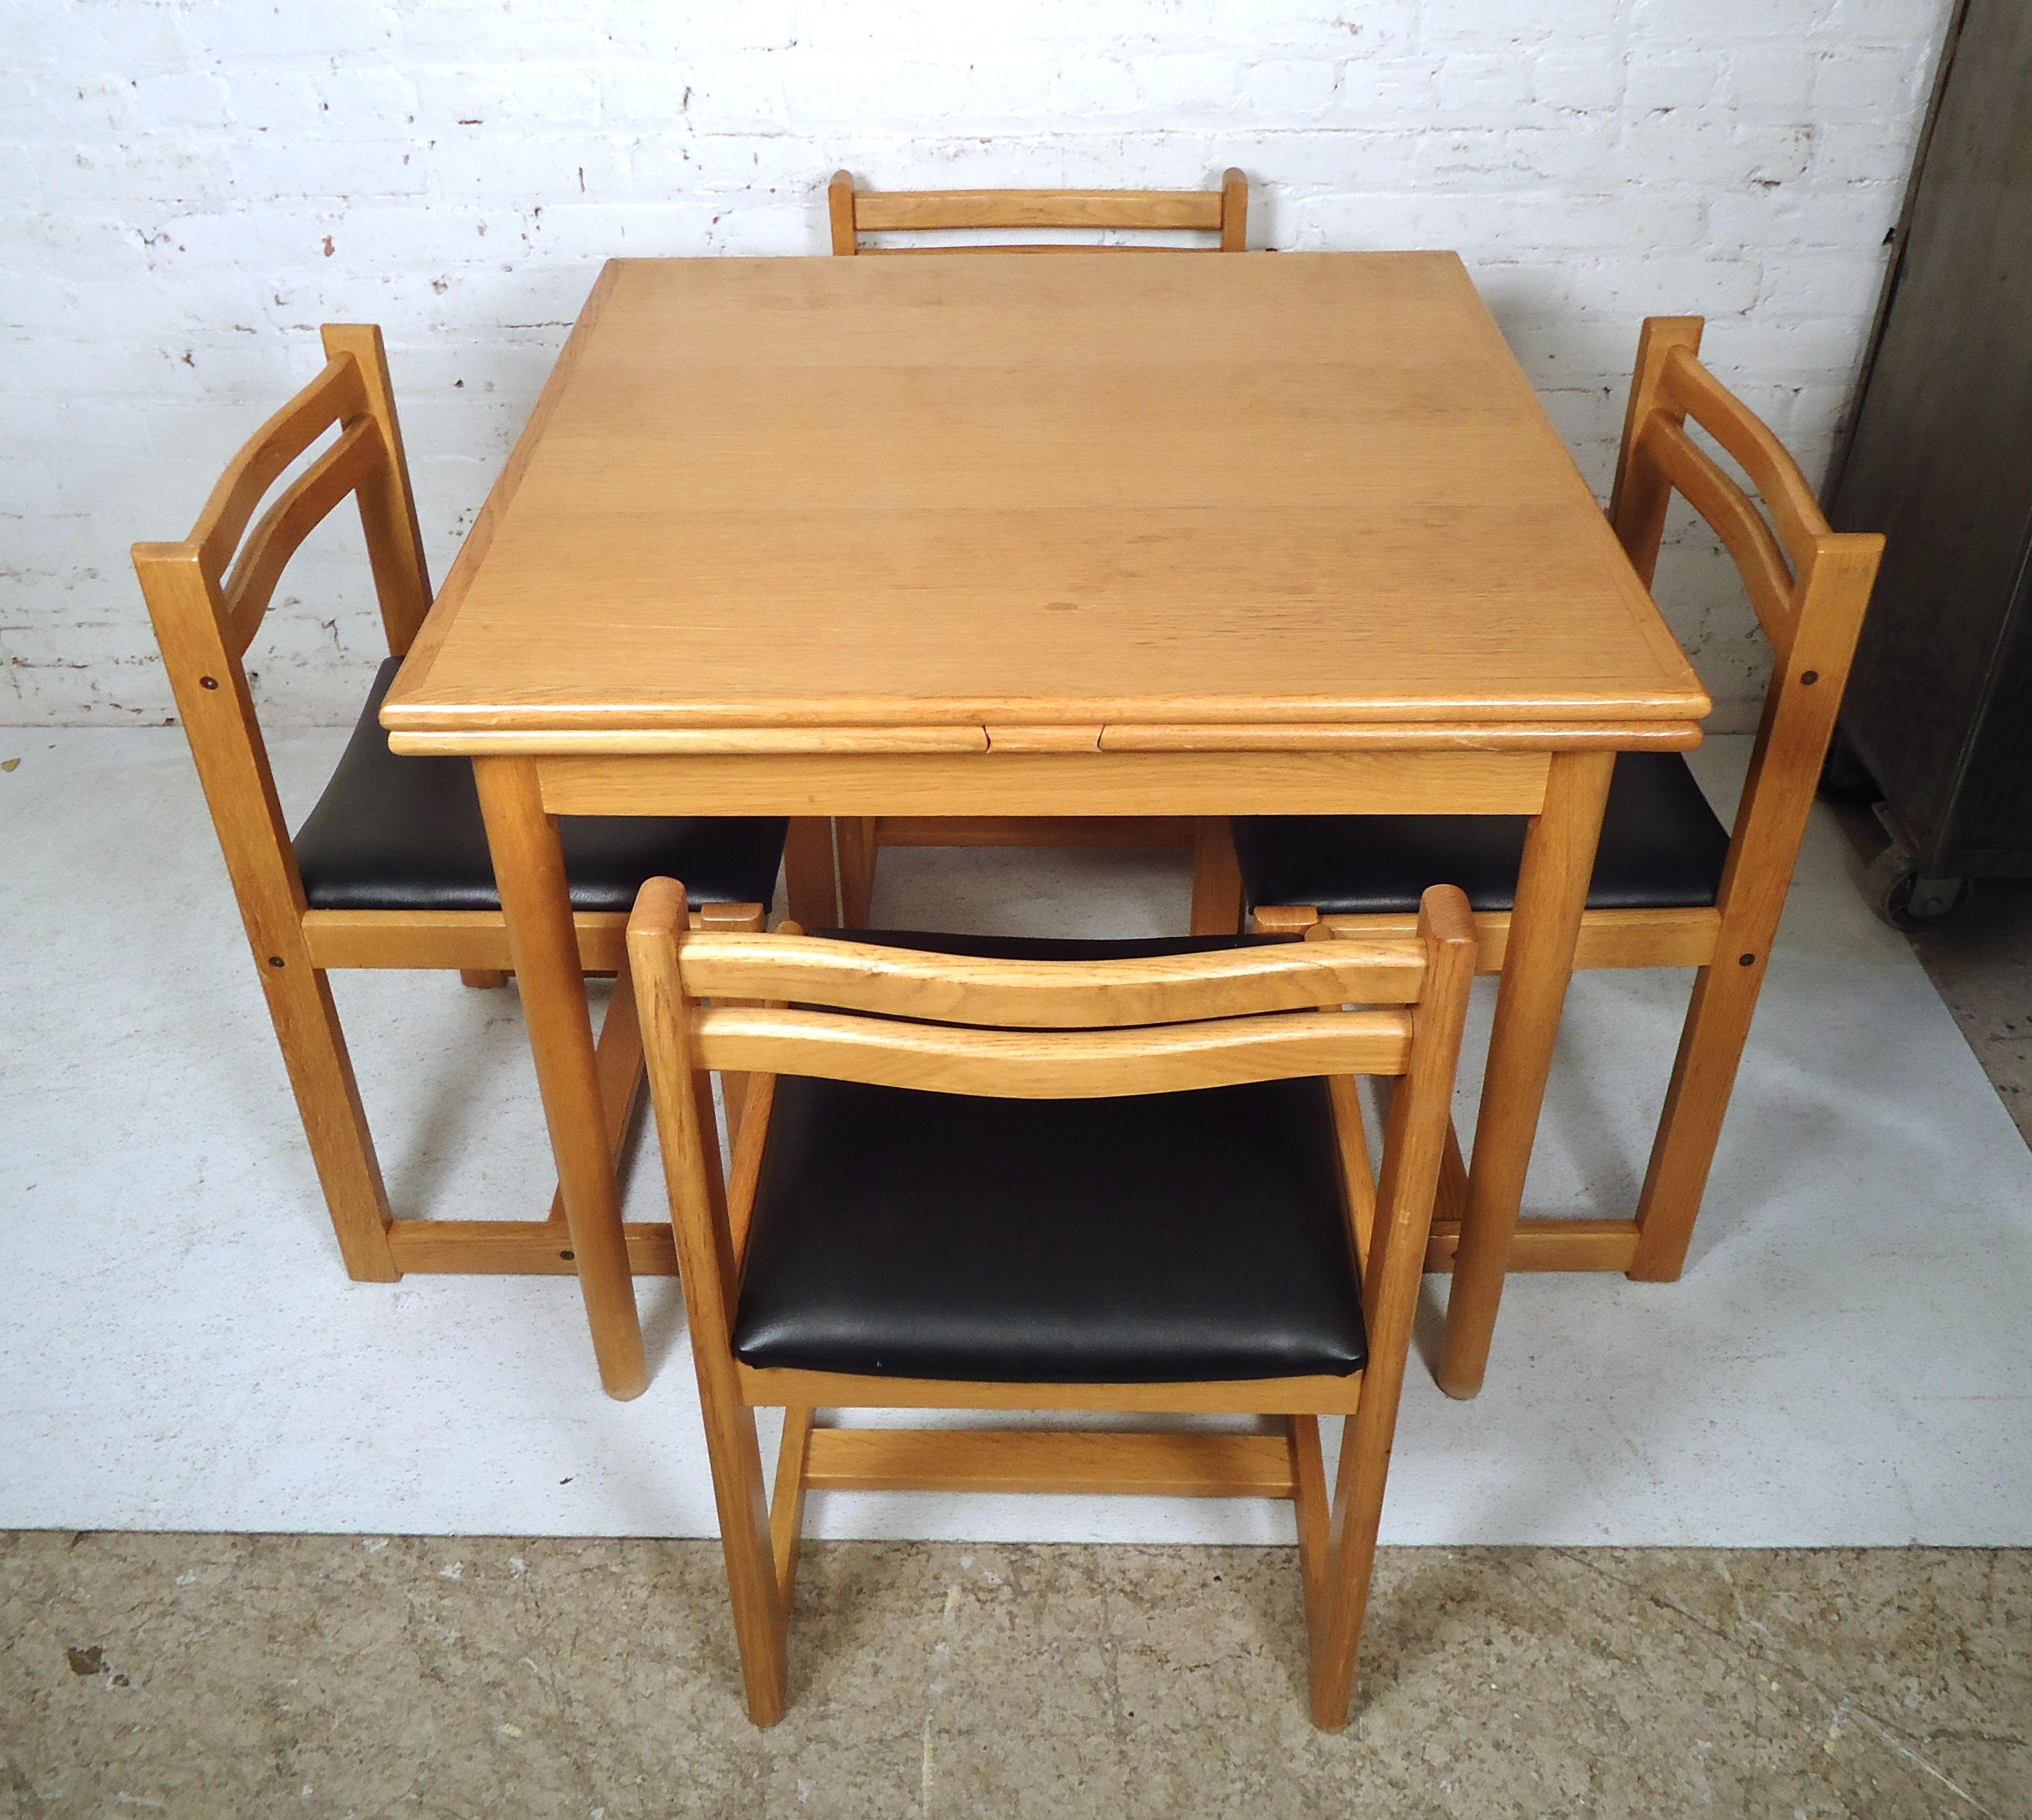 Great Mid-Century Modern extendable dining table made of rich teak grain throughout features four Danish chairs with vinyl cushions.

Extended measurements: 64W 33.5D 29.5H
Chair measurement: 18W 17D 29H 
SH: 17

Please confirm item location